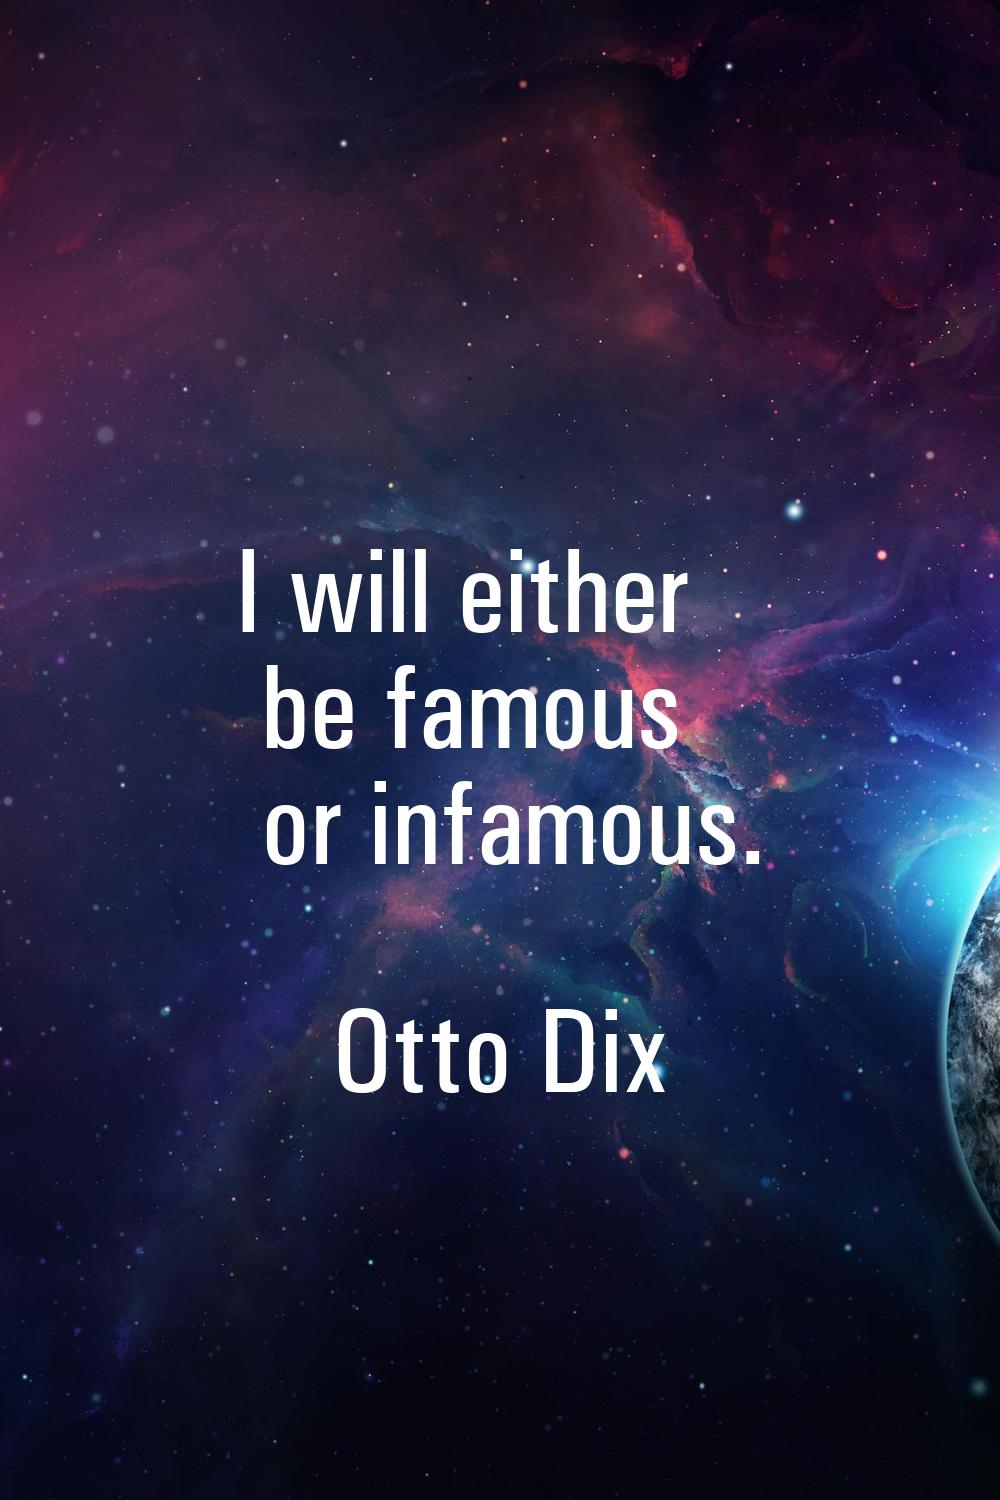 I will either be famous or infamous.